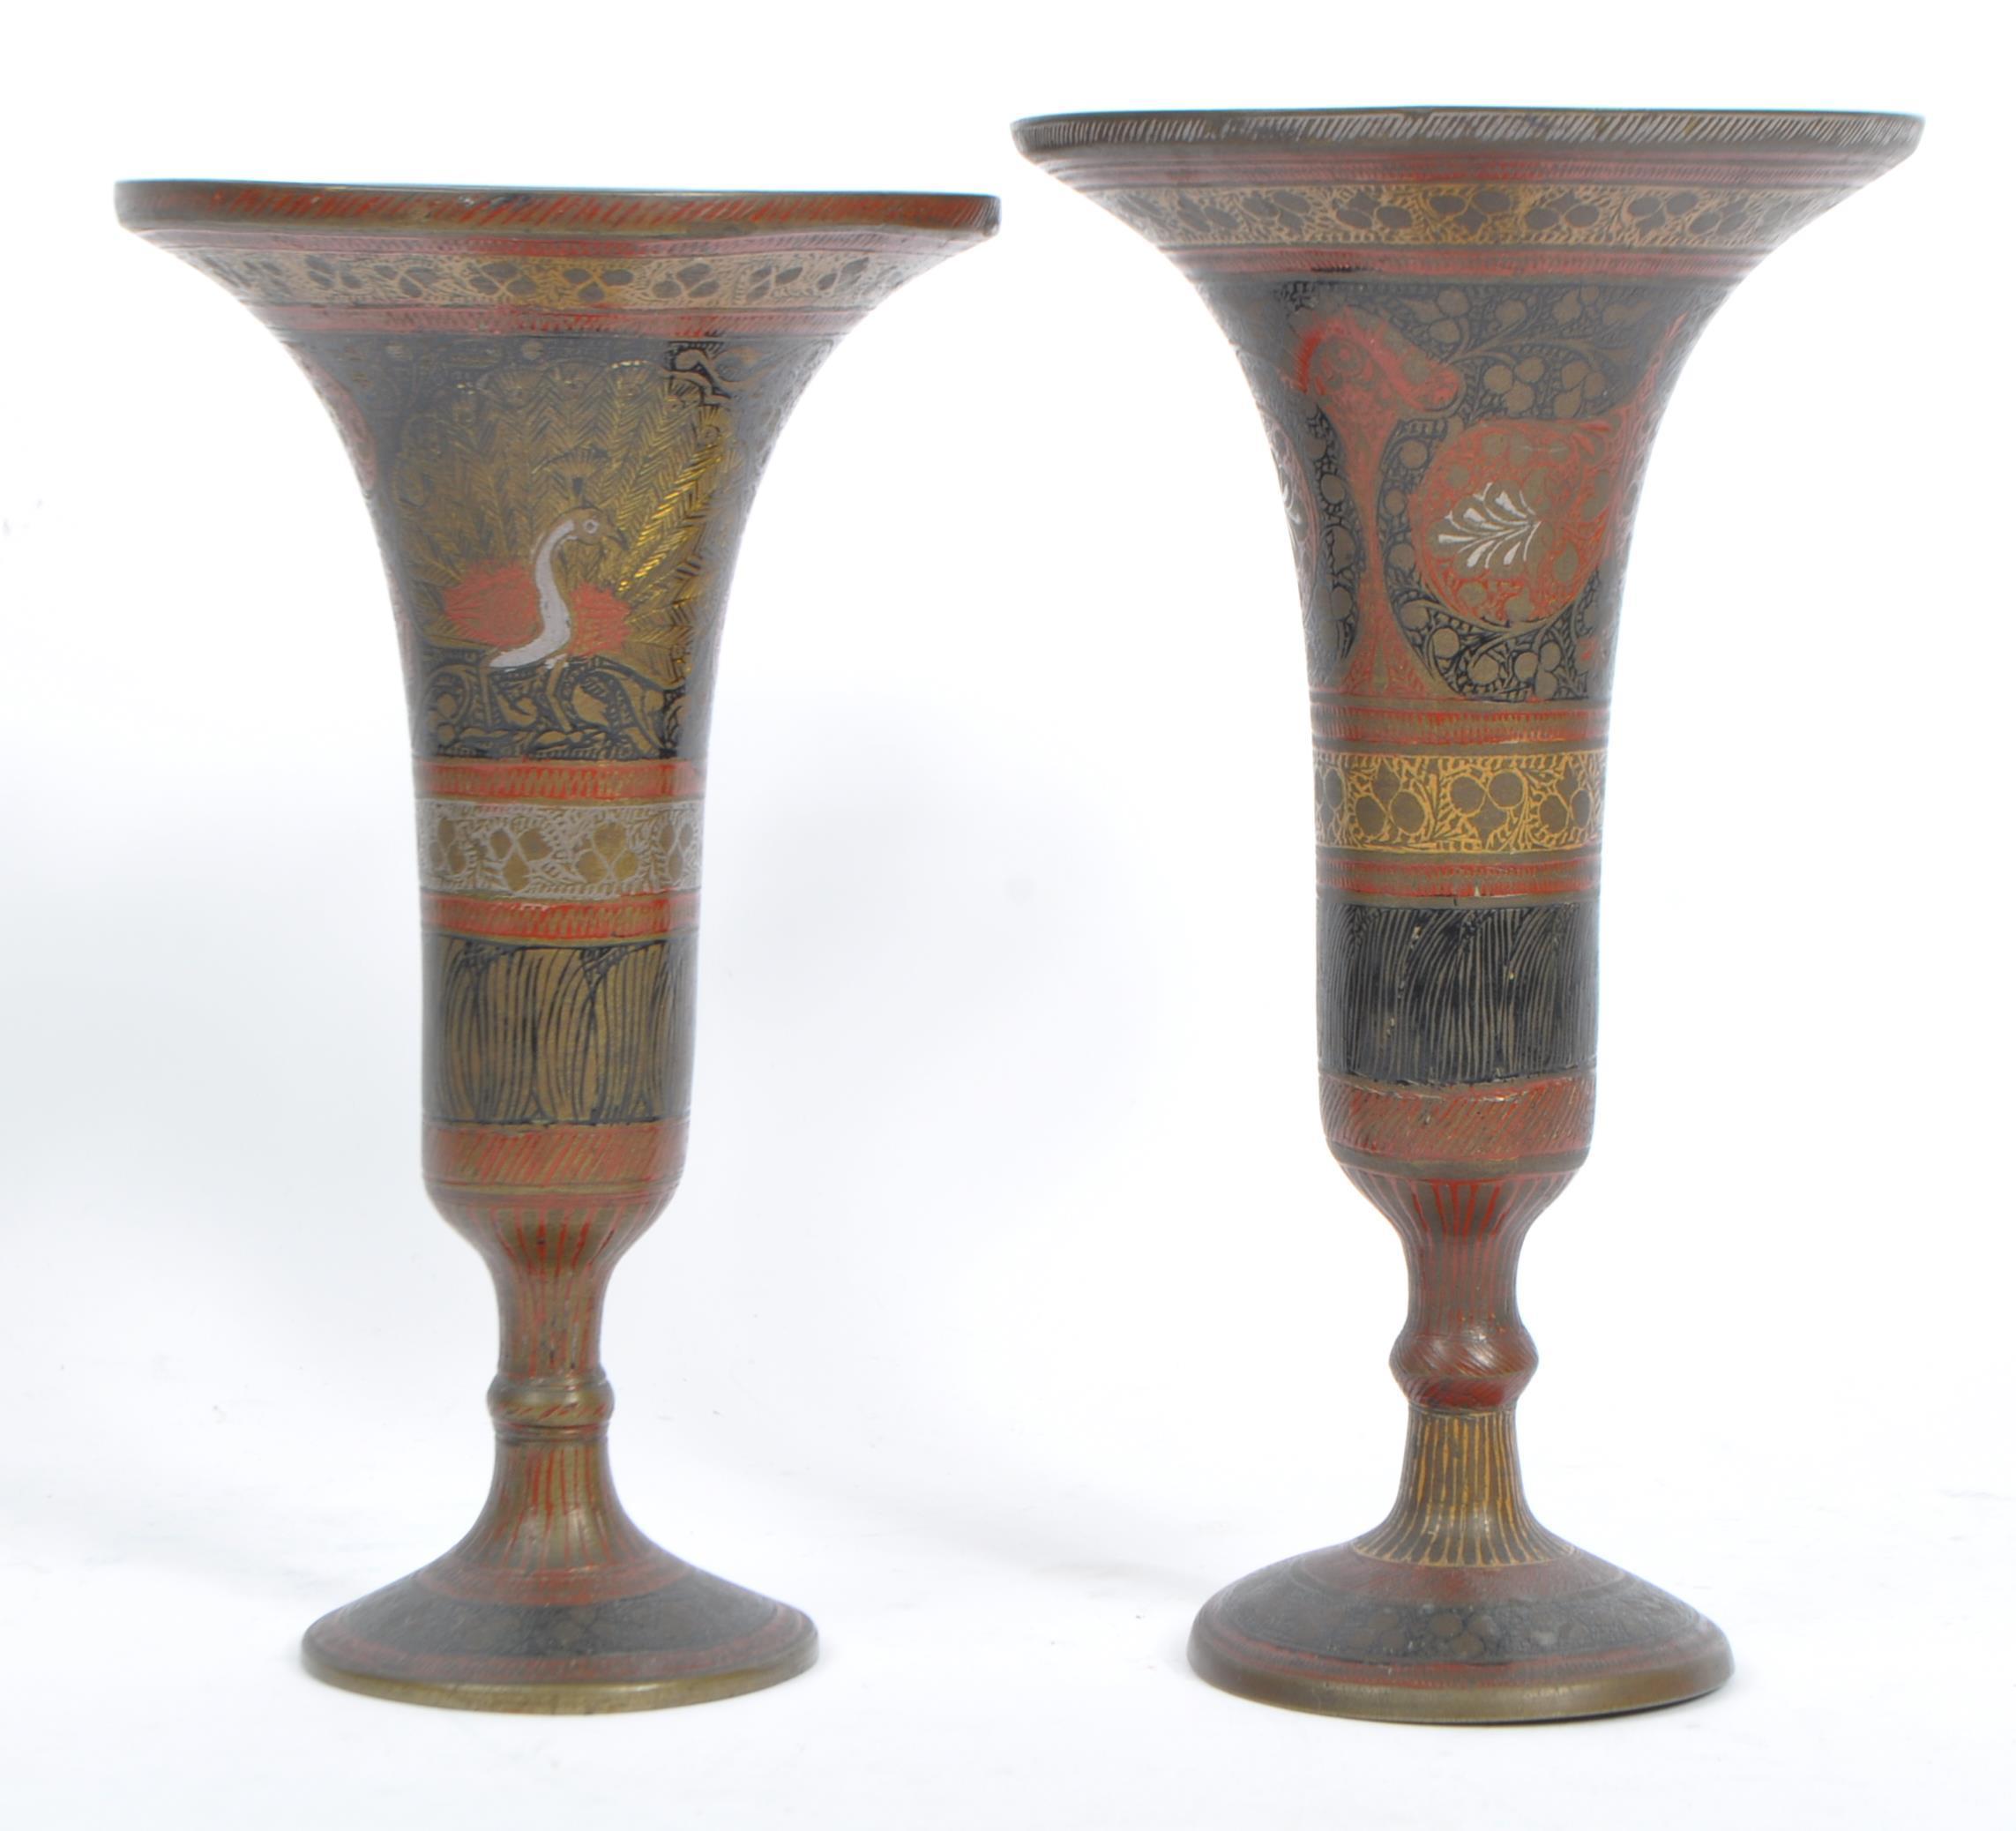 PAIR OF INDIAN BRASS WIDE FLANGE SPILL VASES